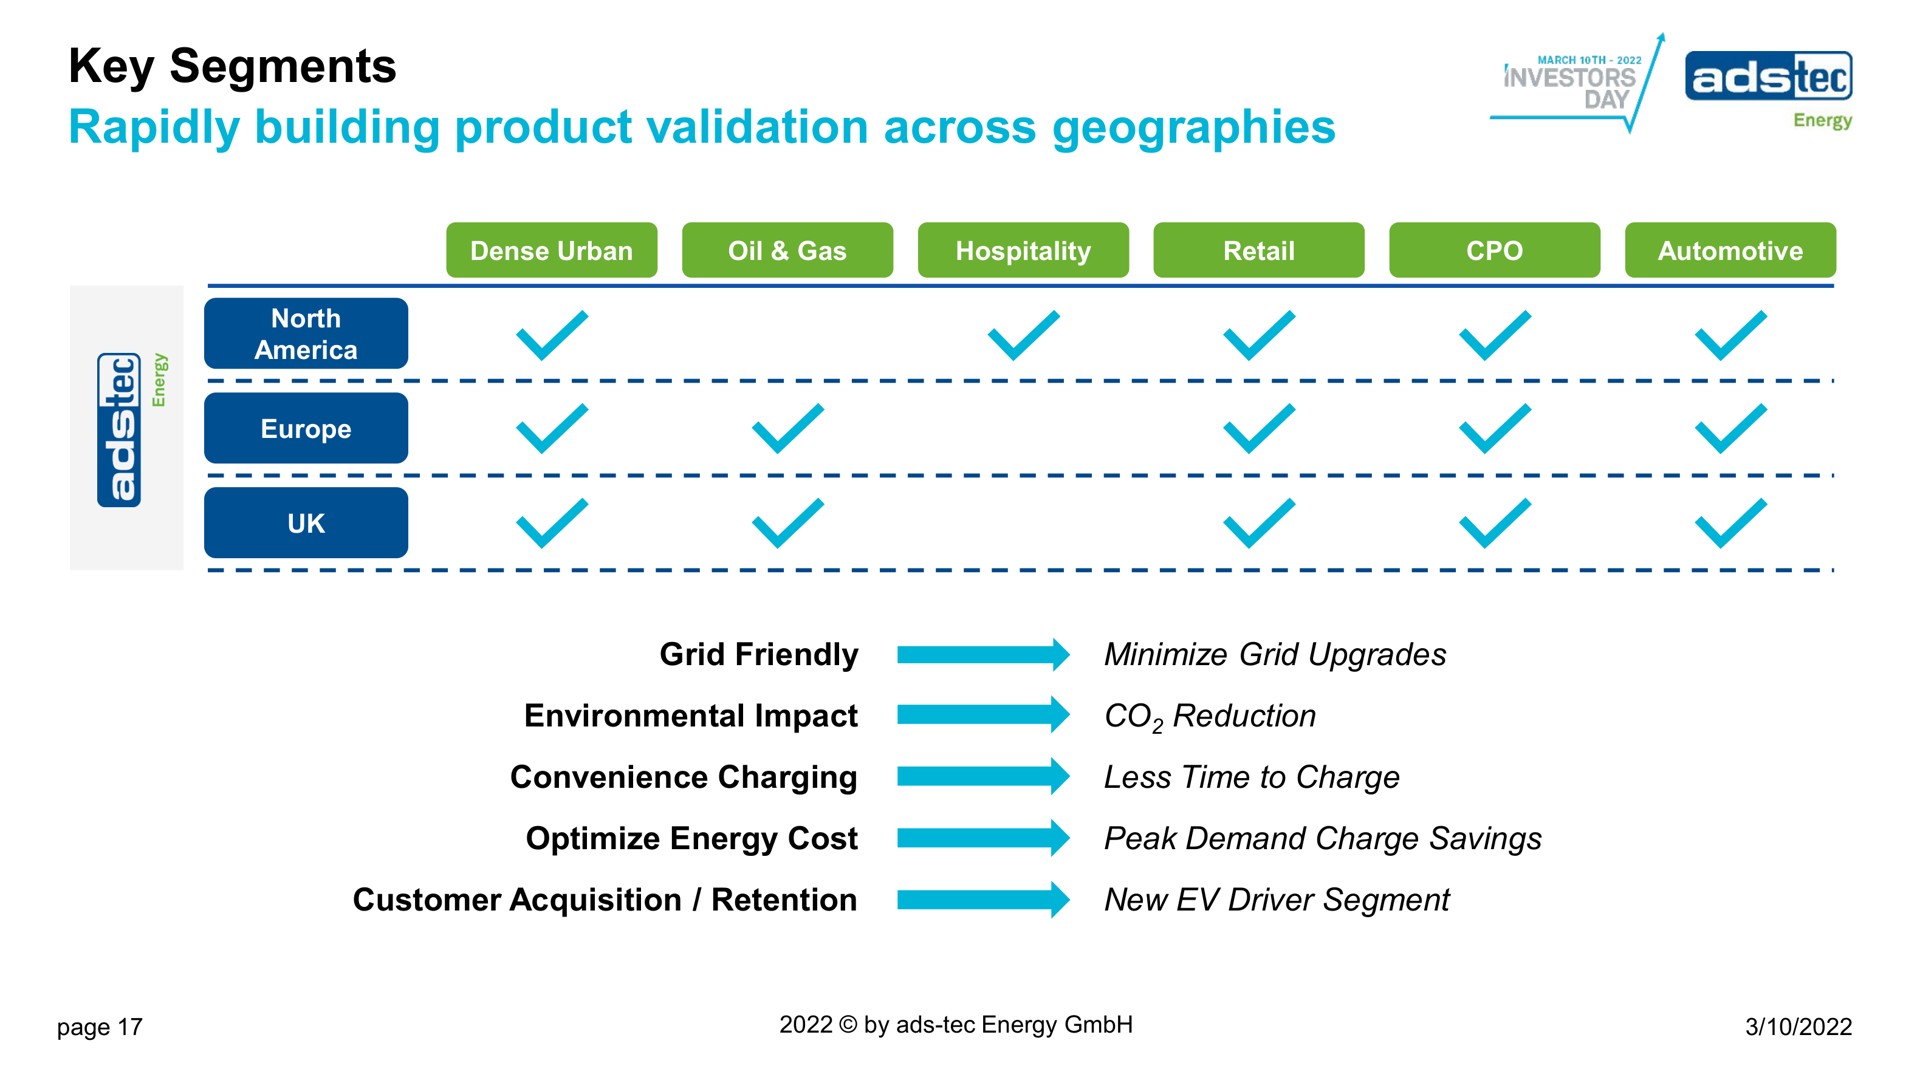 key segments rapidly building product validation across geographies energy | ads-tec Energy